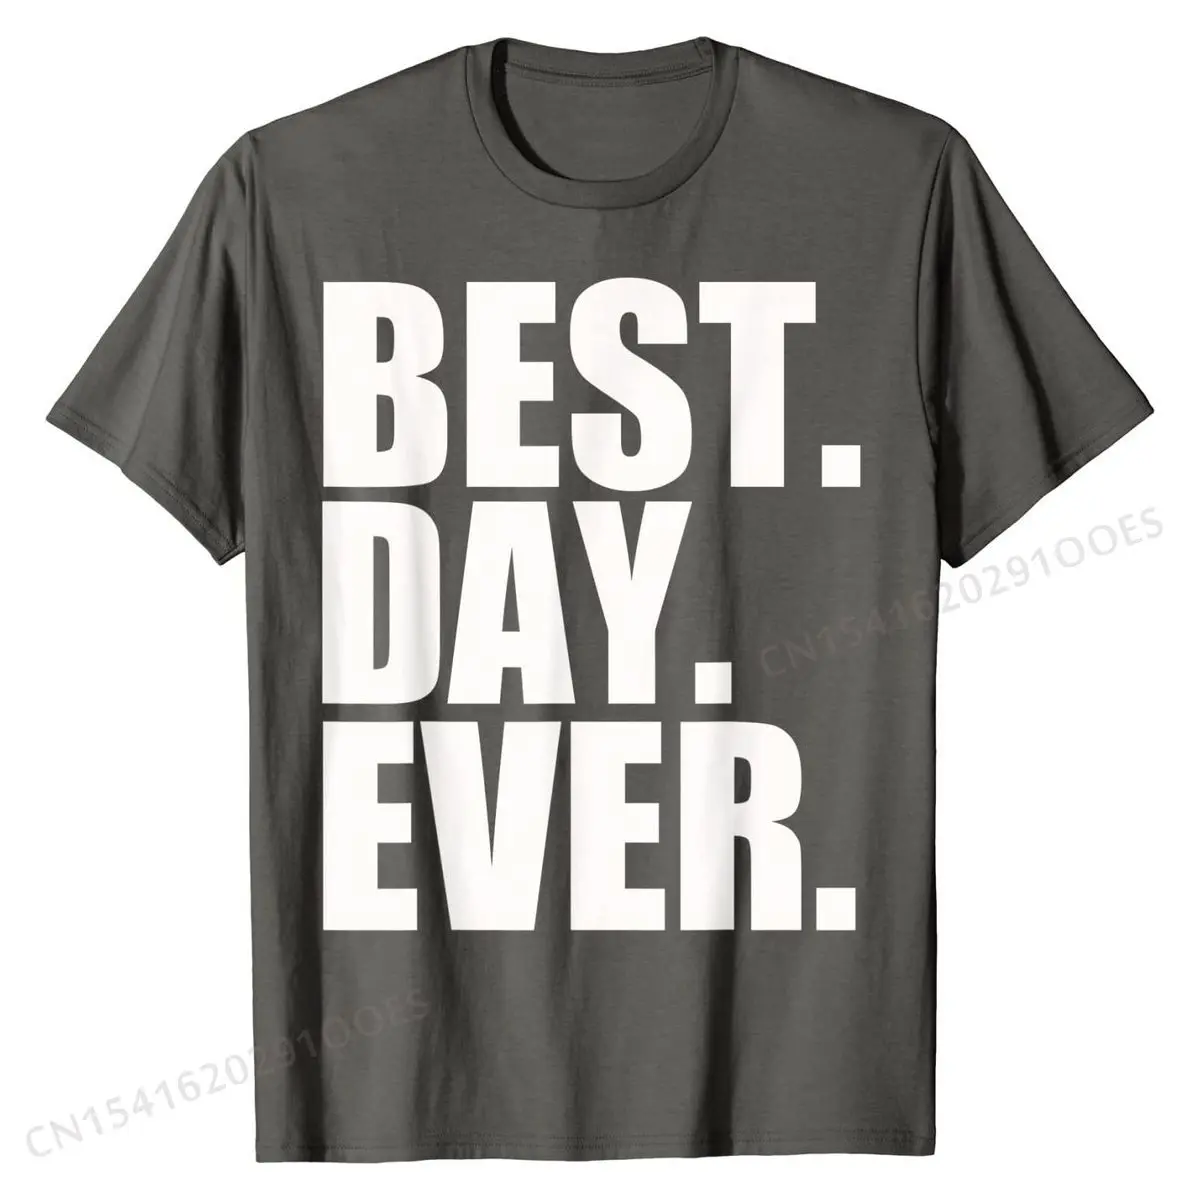 

Best Day Ever Funny Sayings Event T-Shirt Fitted Men Tshirts Cotton Tops Shirt Printed